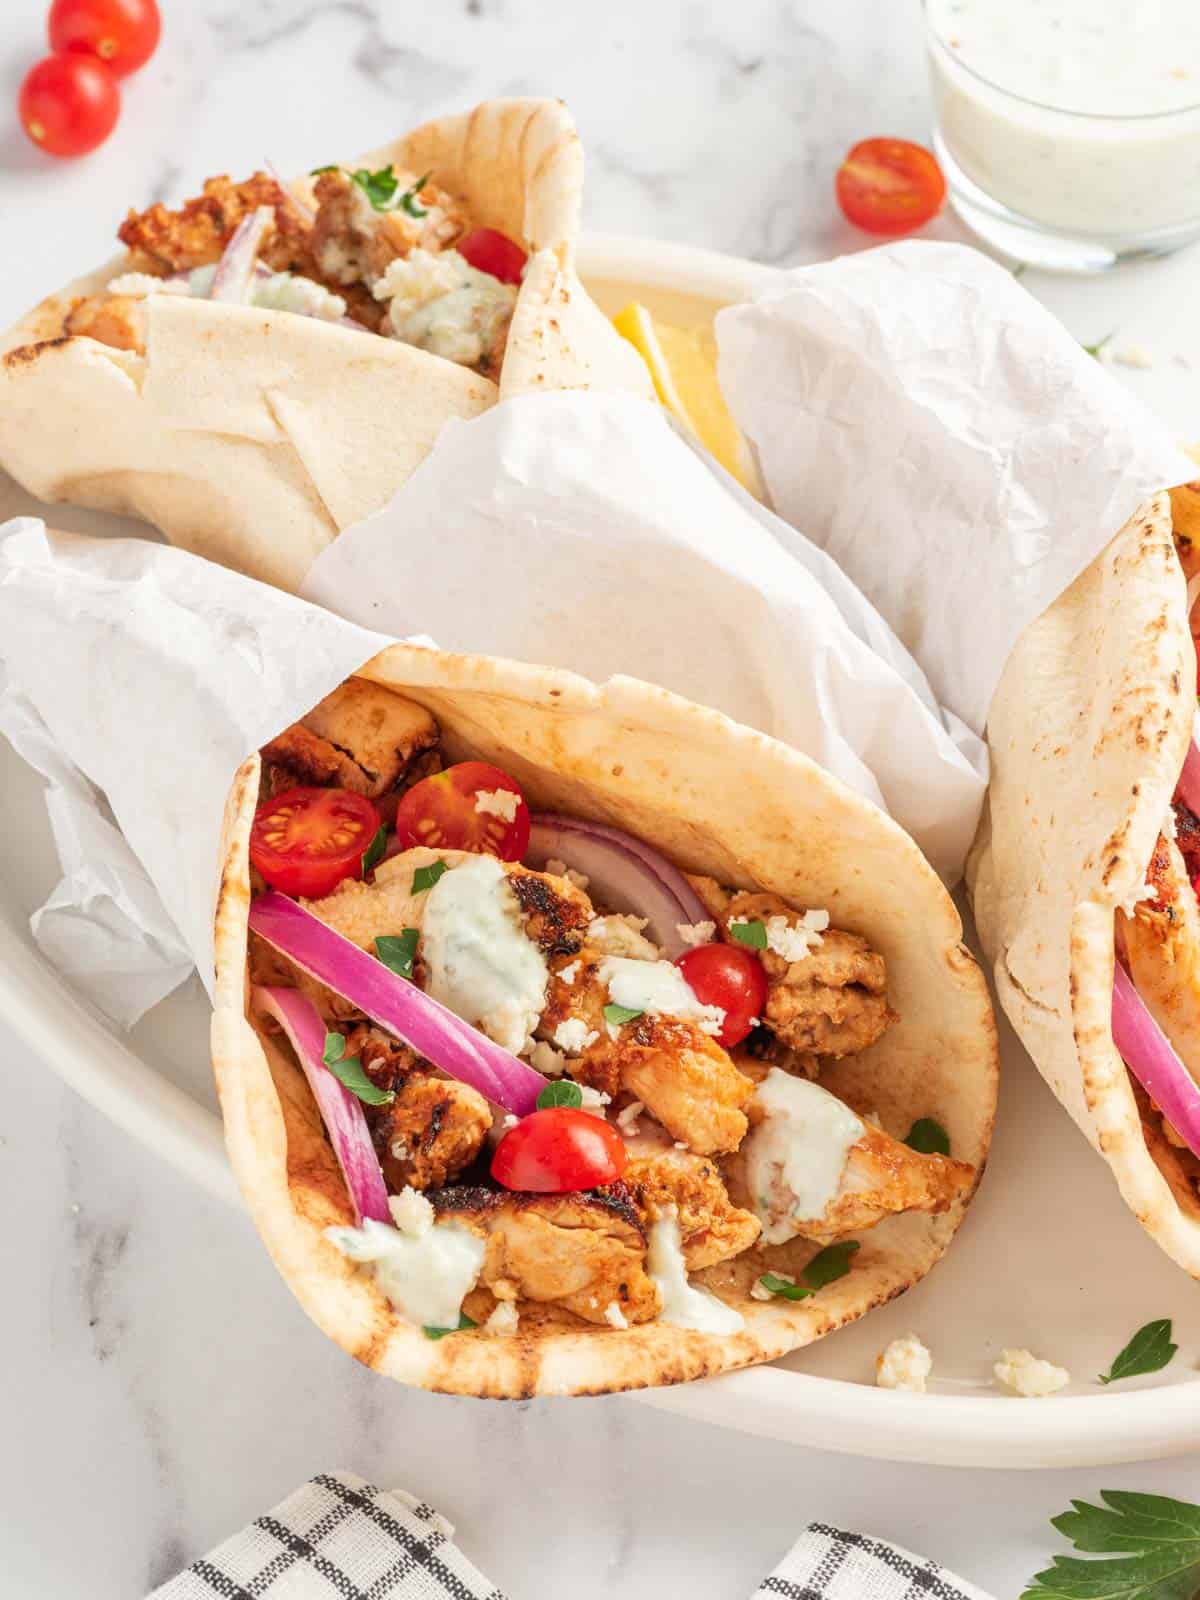 Authentic chicken gyros on a platter.